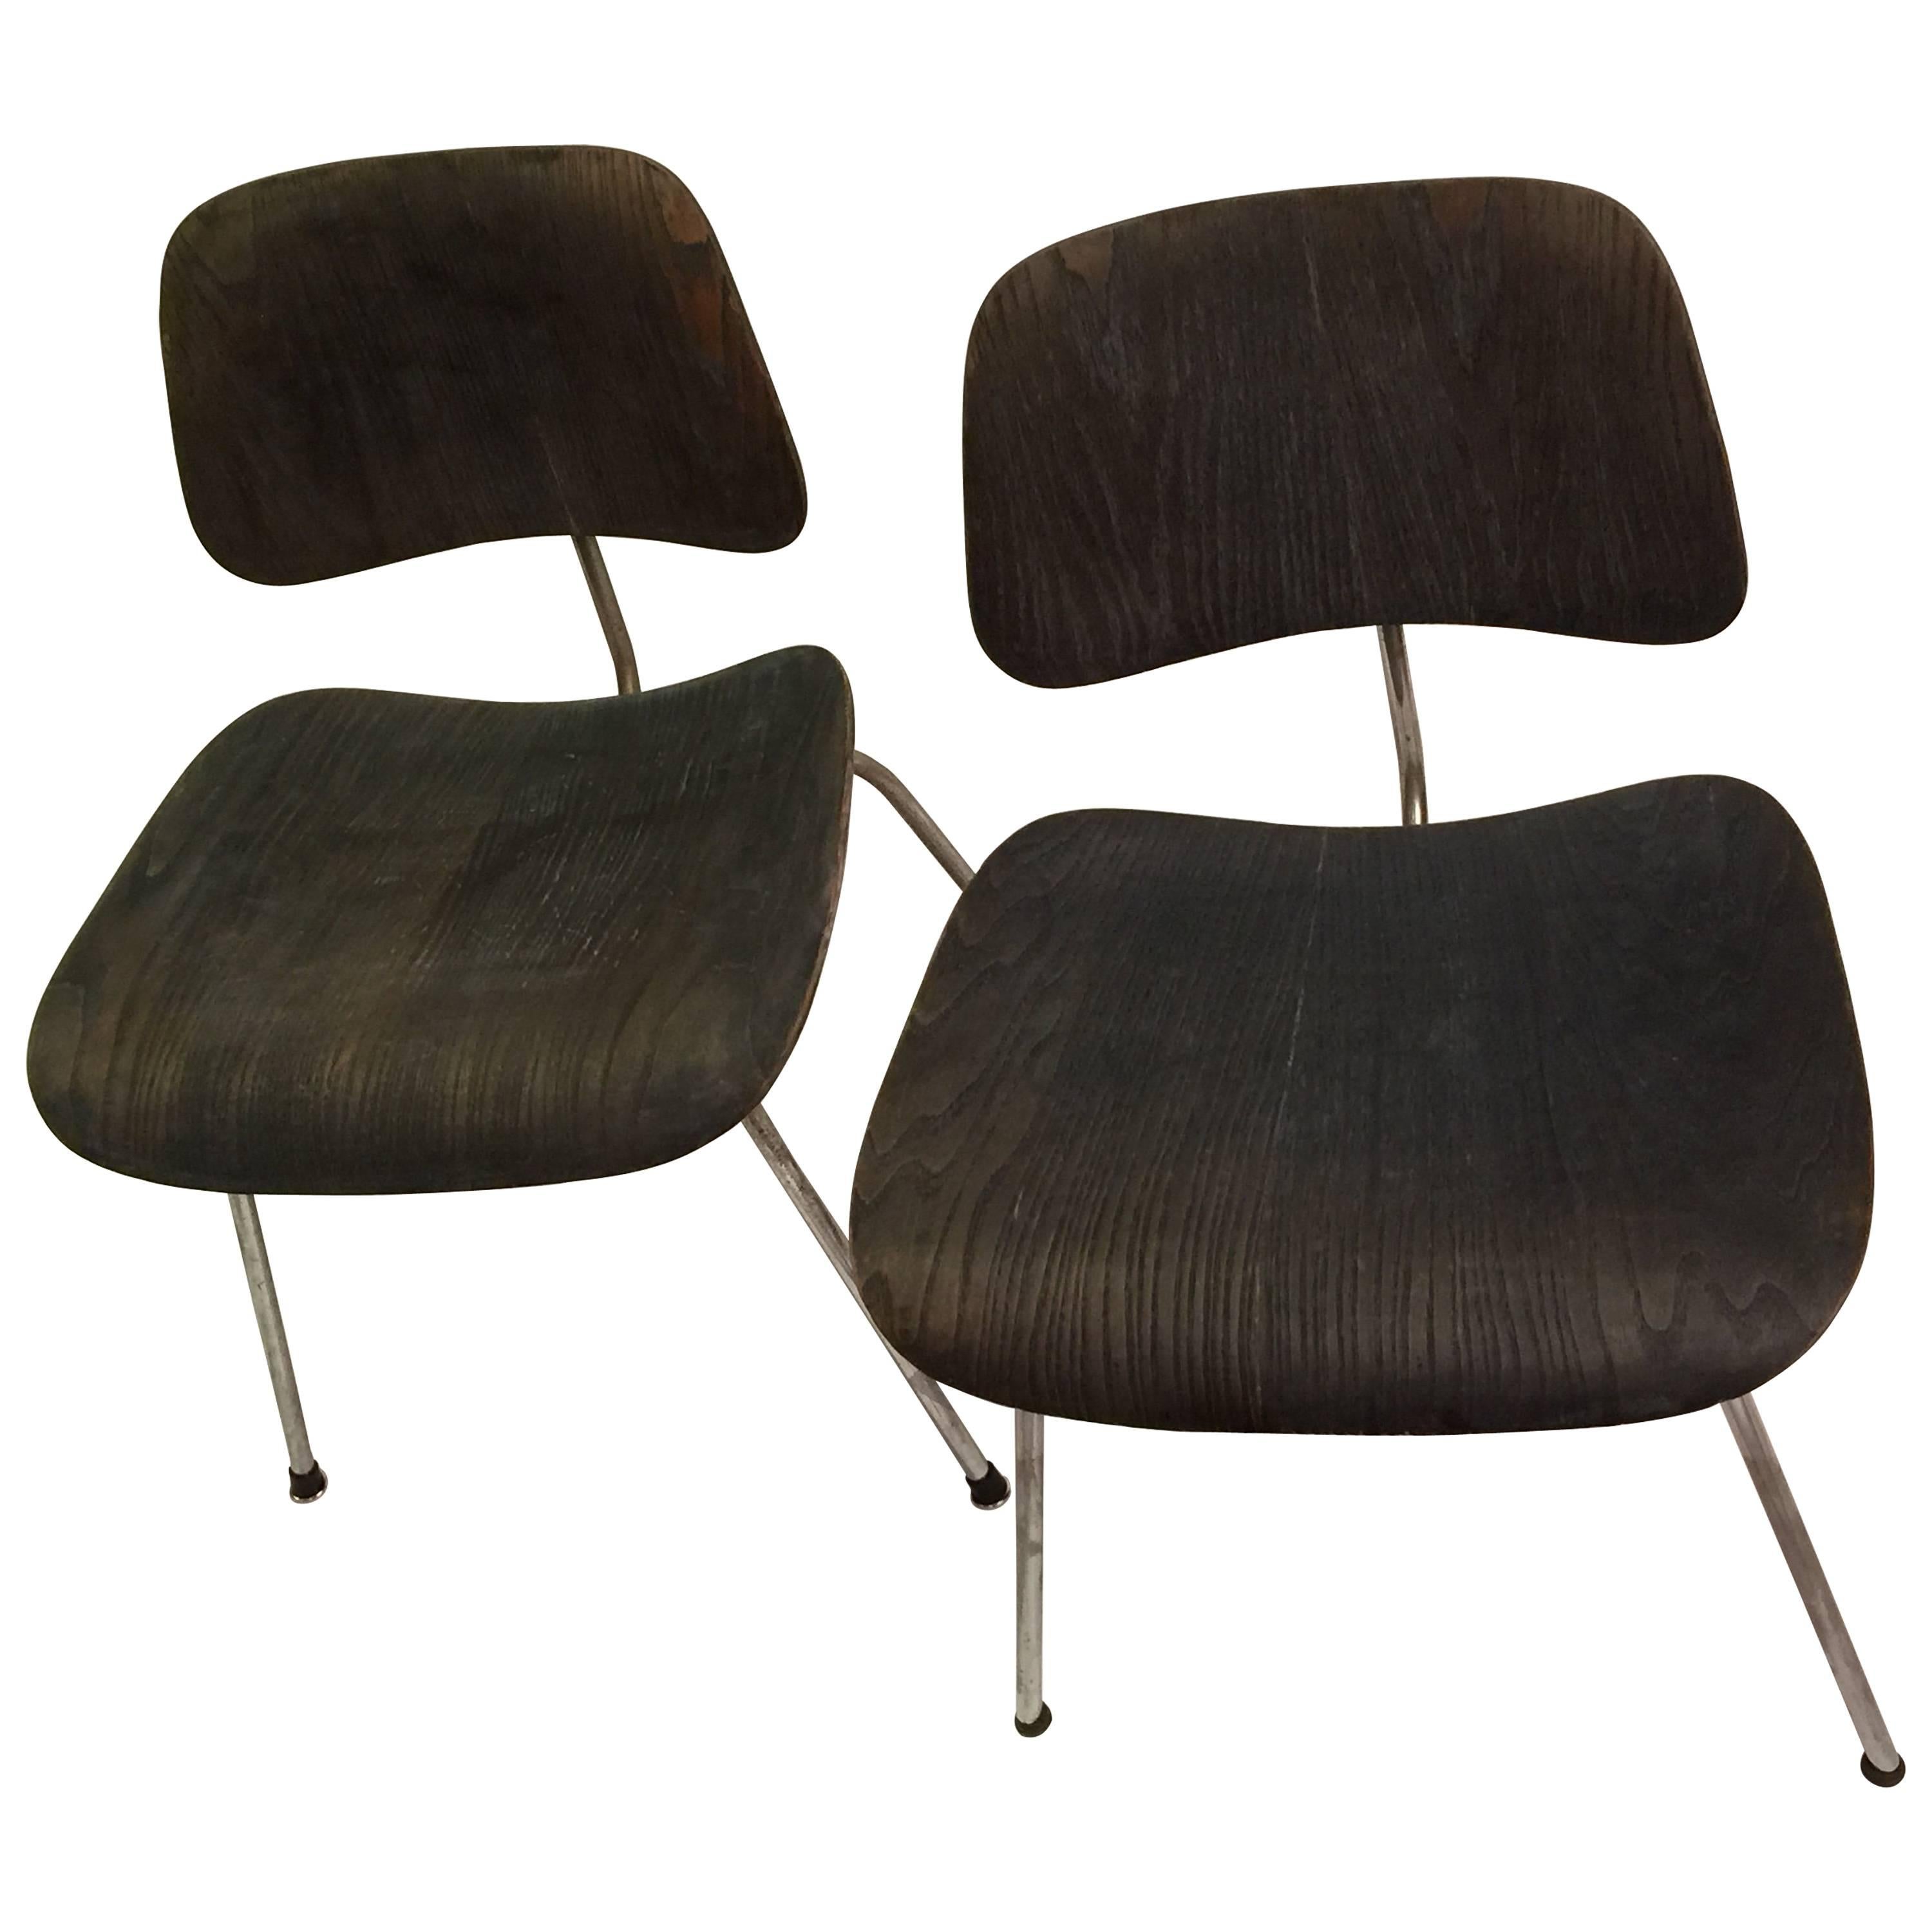 Pair of Eames for Evans DCM chairs